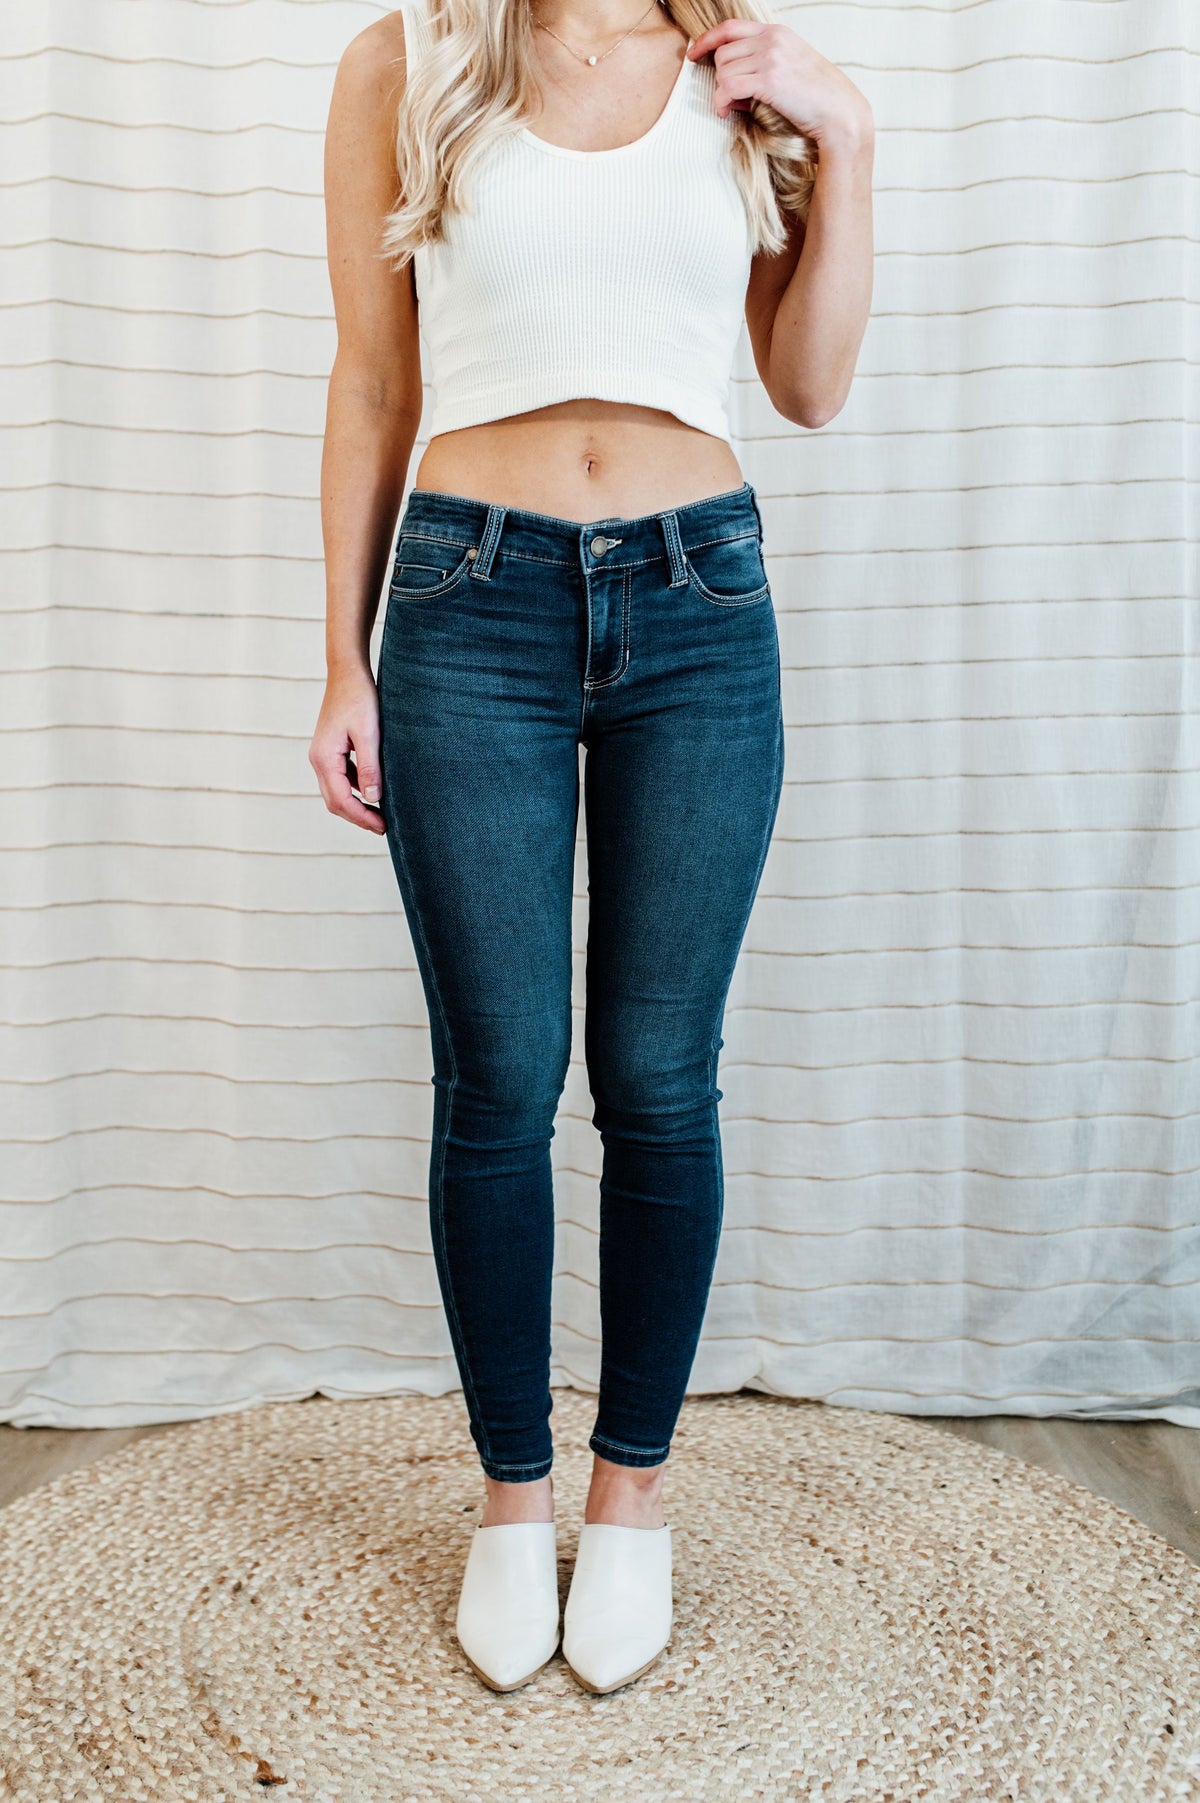 How To Wear Crop Tops With Skinny Jeans? – solowomen